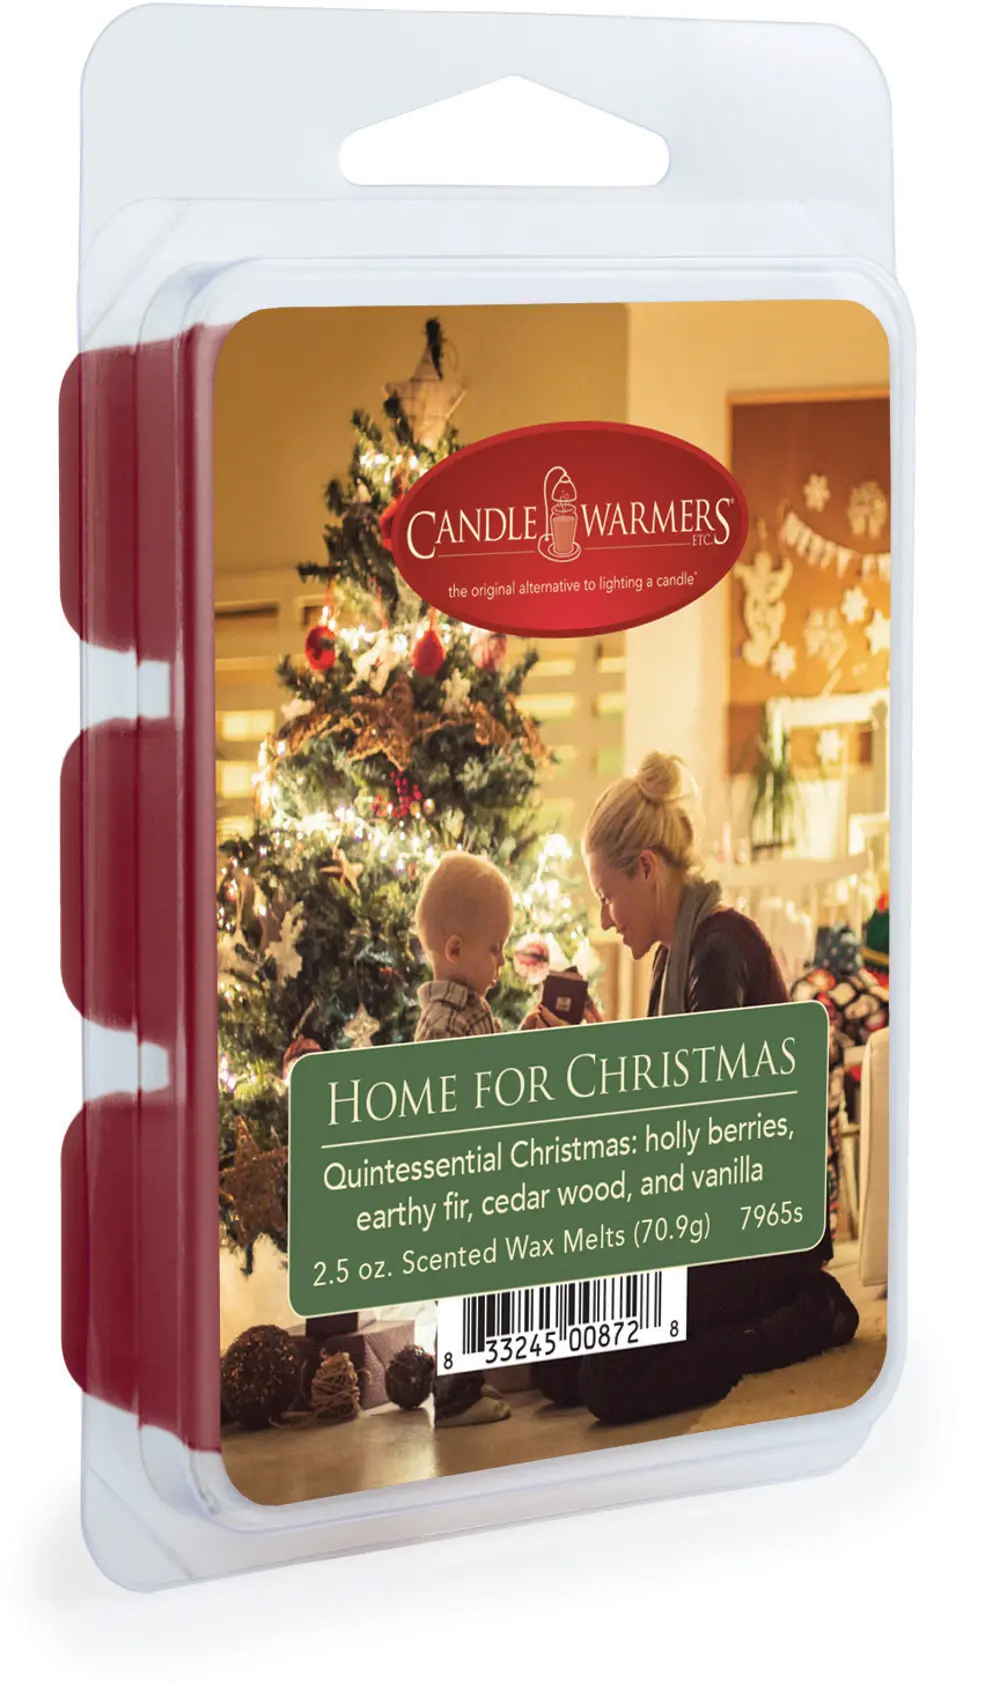 Home For Christmas 2.5oz Wax Melt - Candle Warmers-1